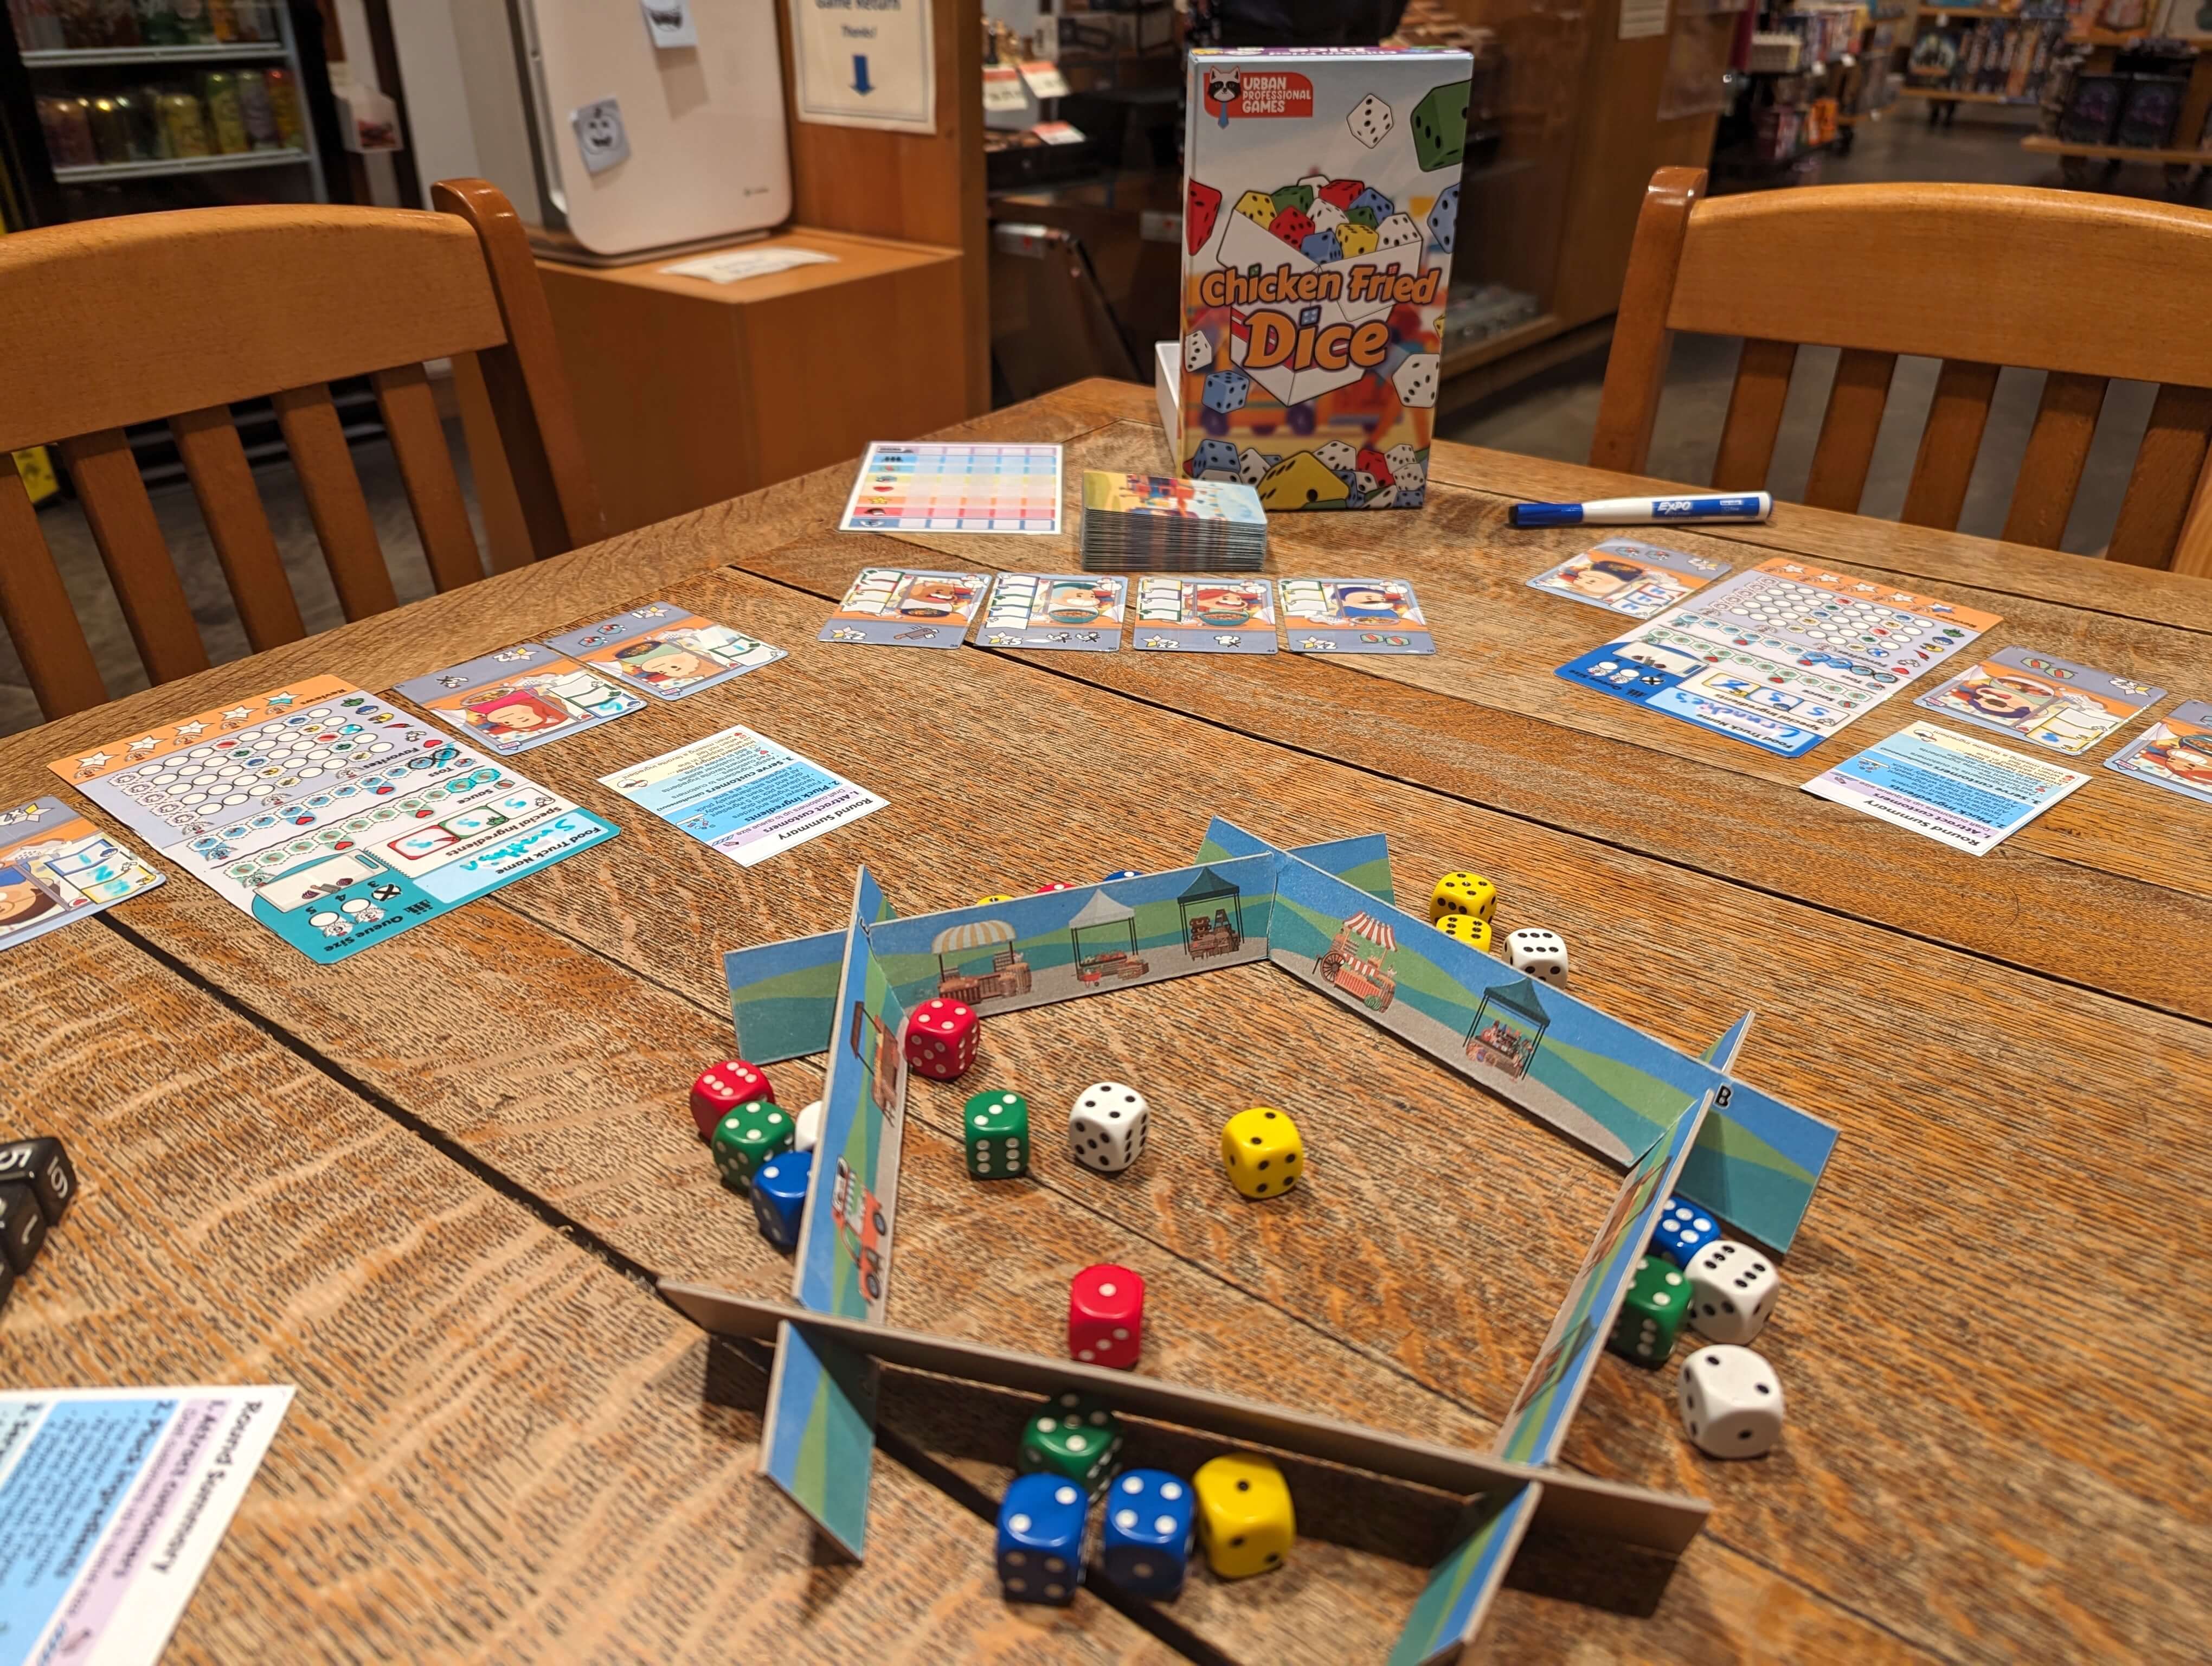 View of a game in progress where players are attracting more customers to their trucks